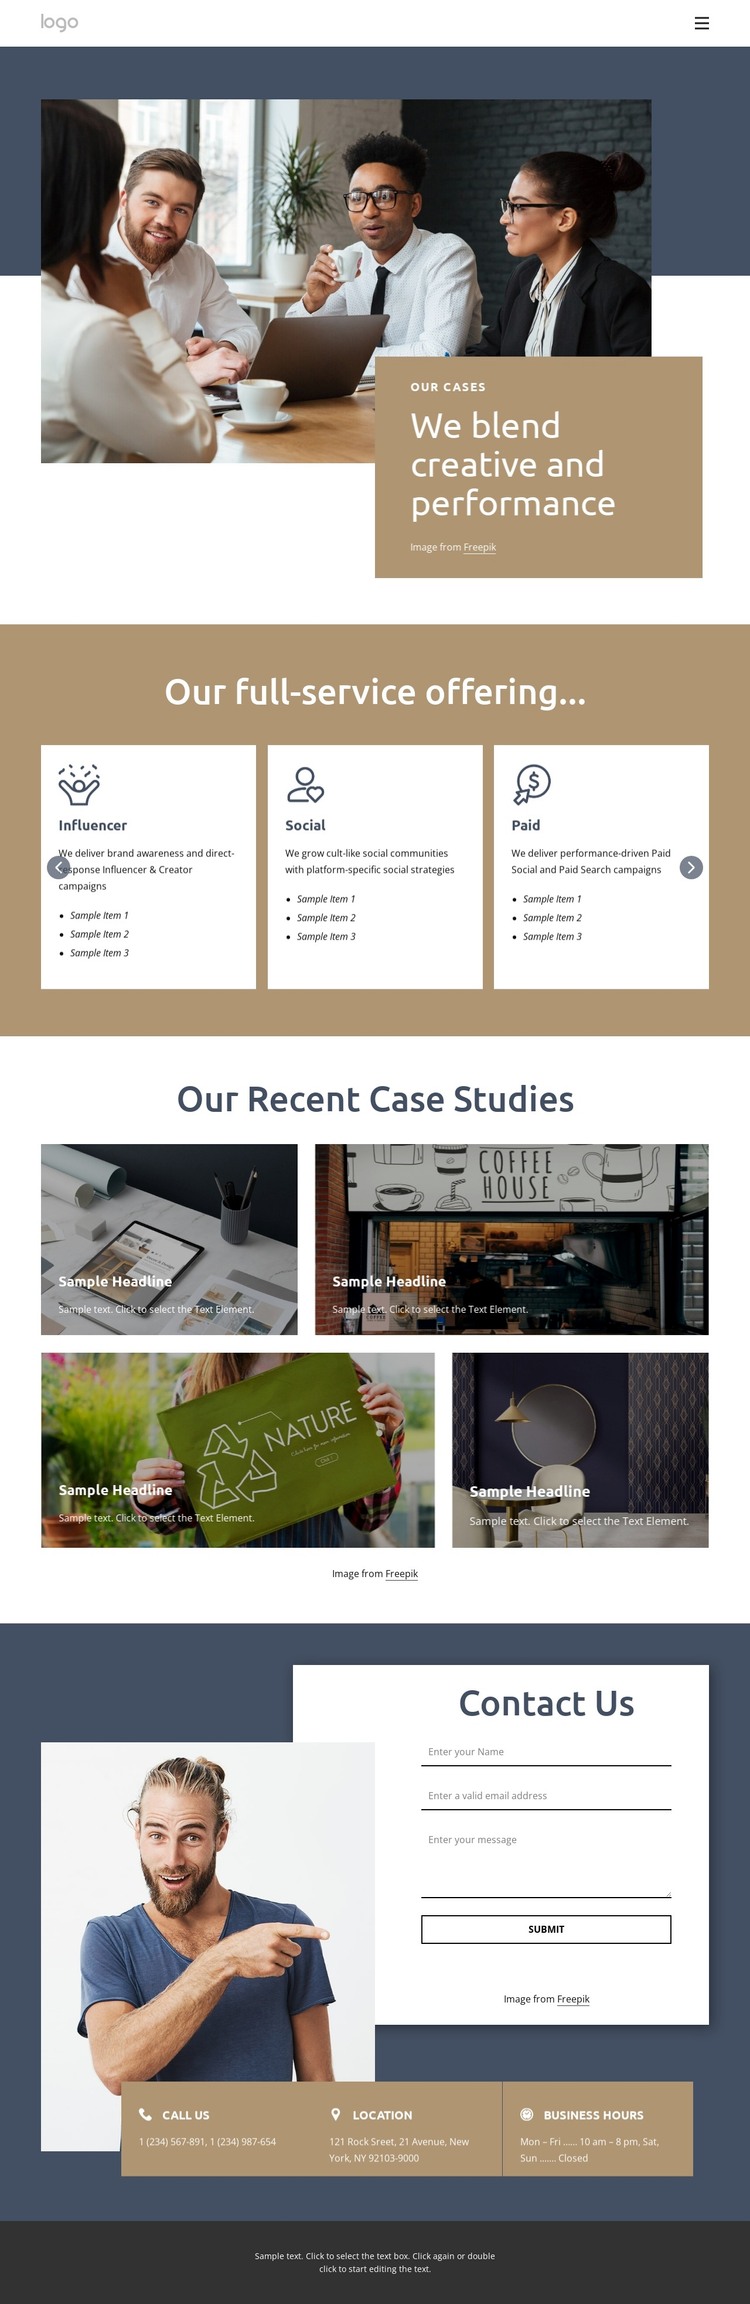 Solve real management consulting cases Web Design